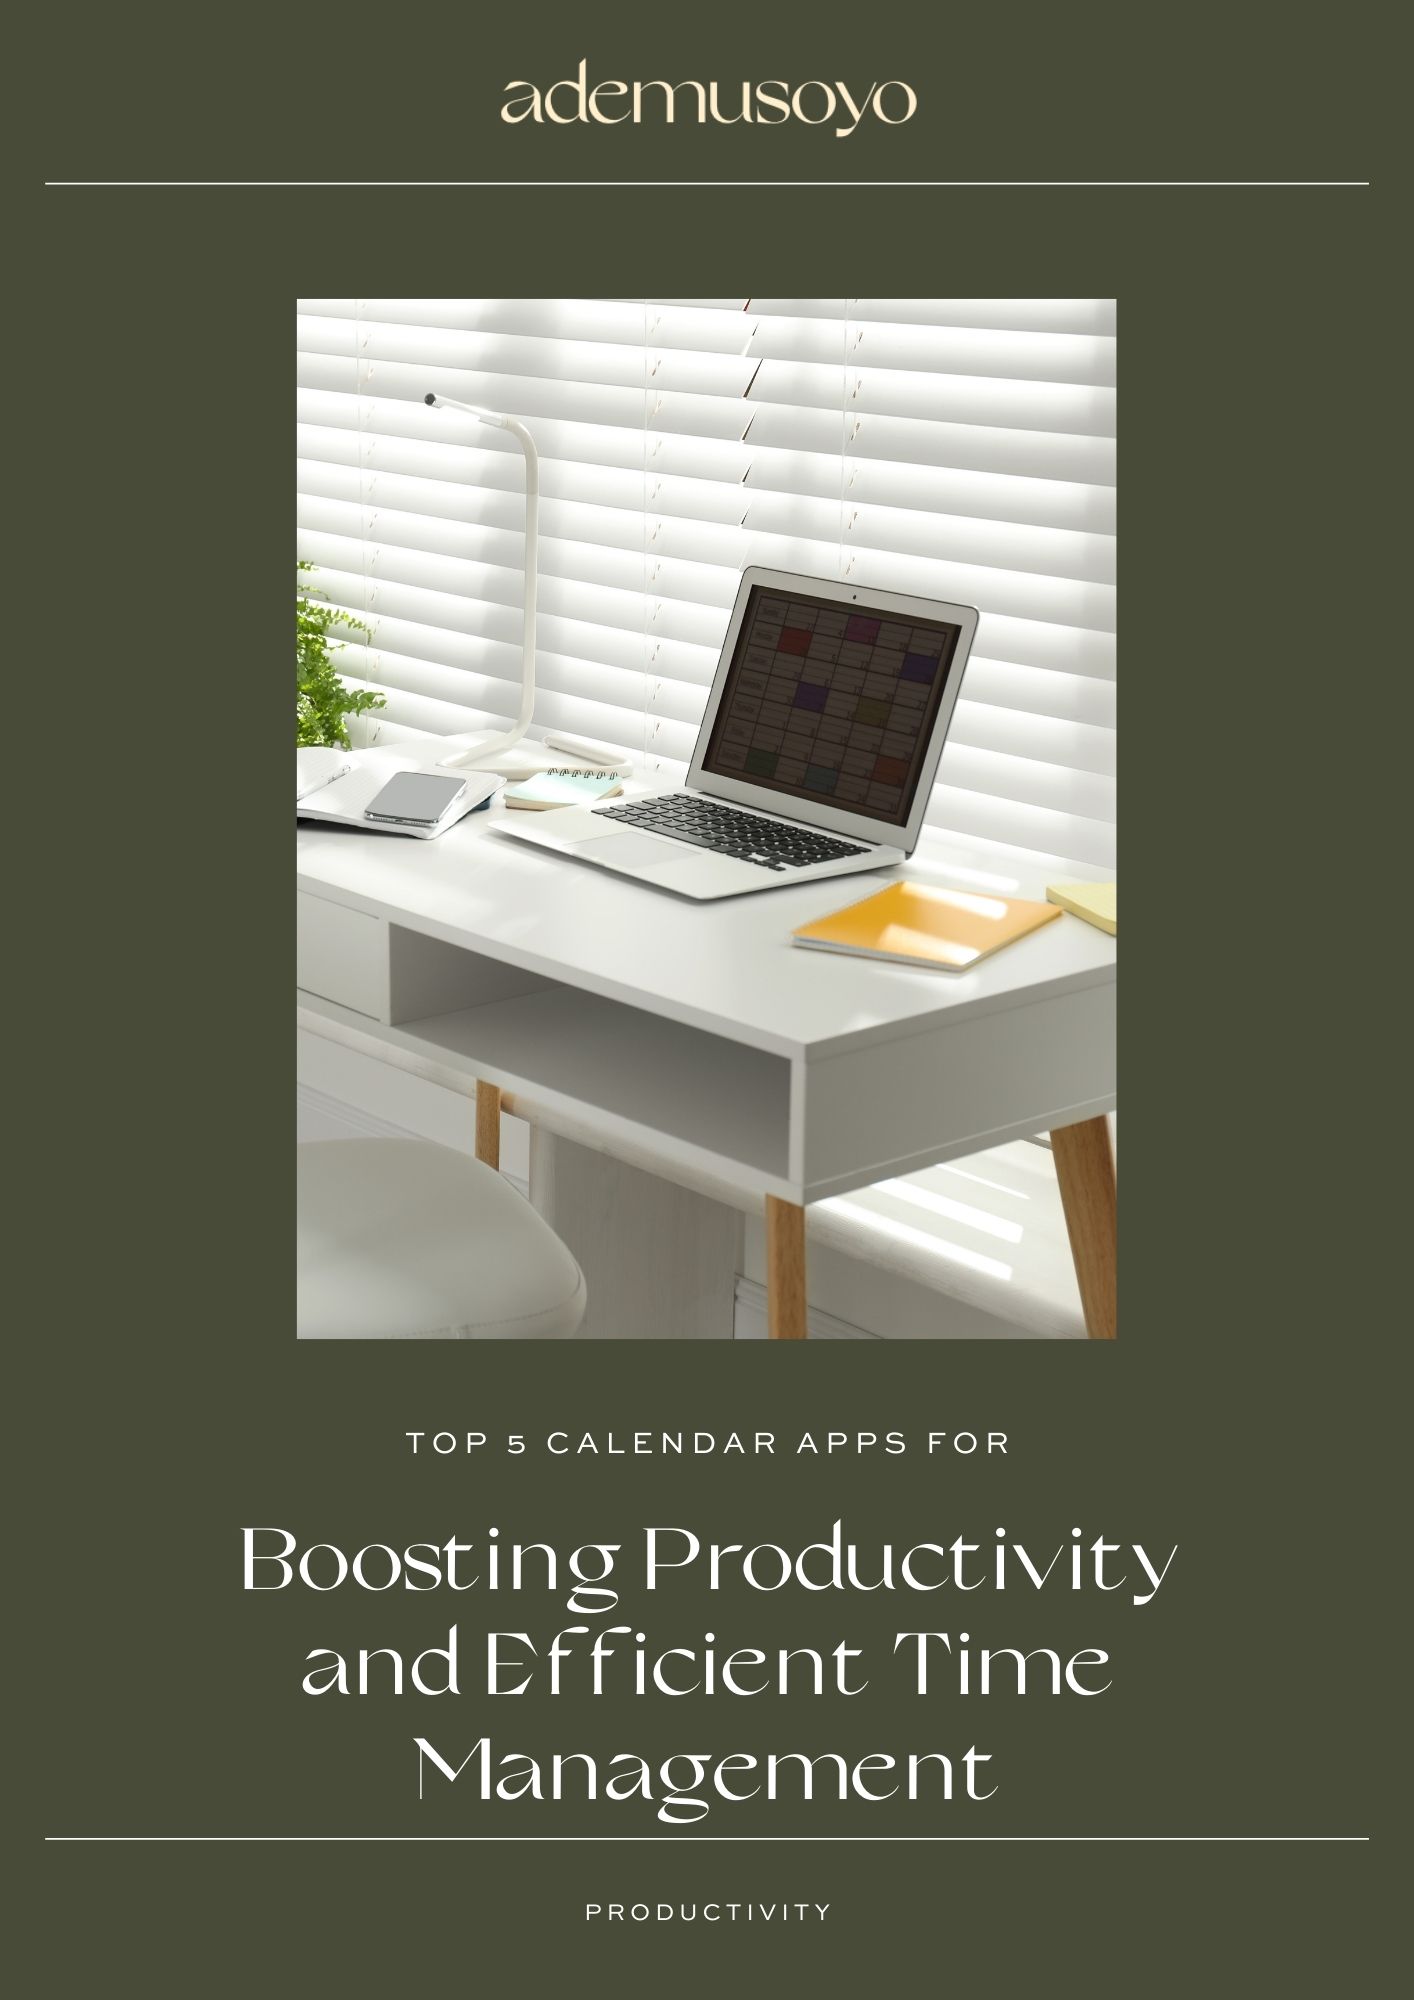 Top 5 Calendar Apps for Boosting Productivity and Time Management